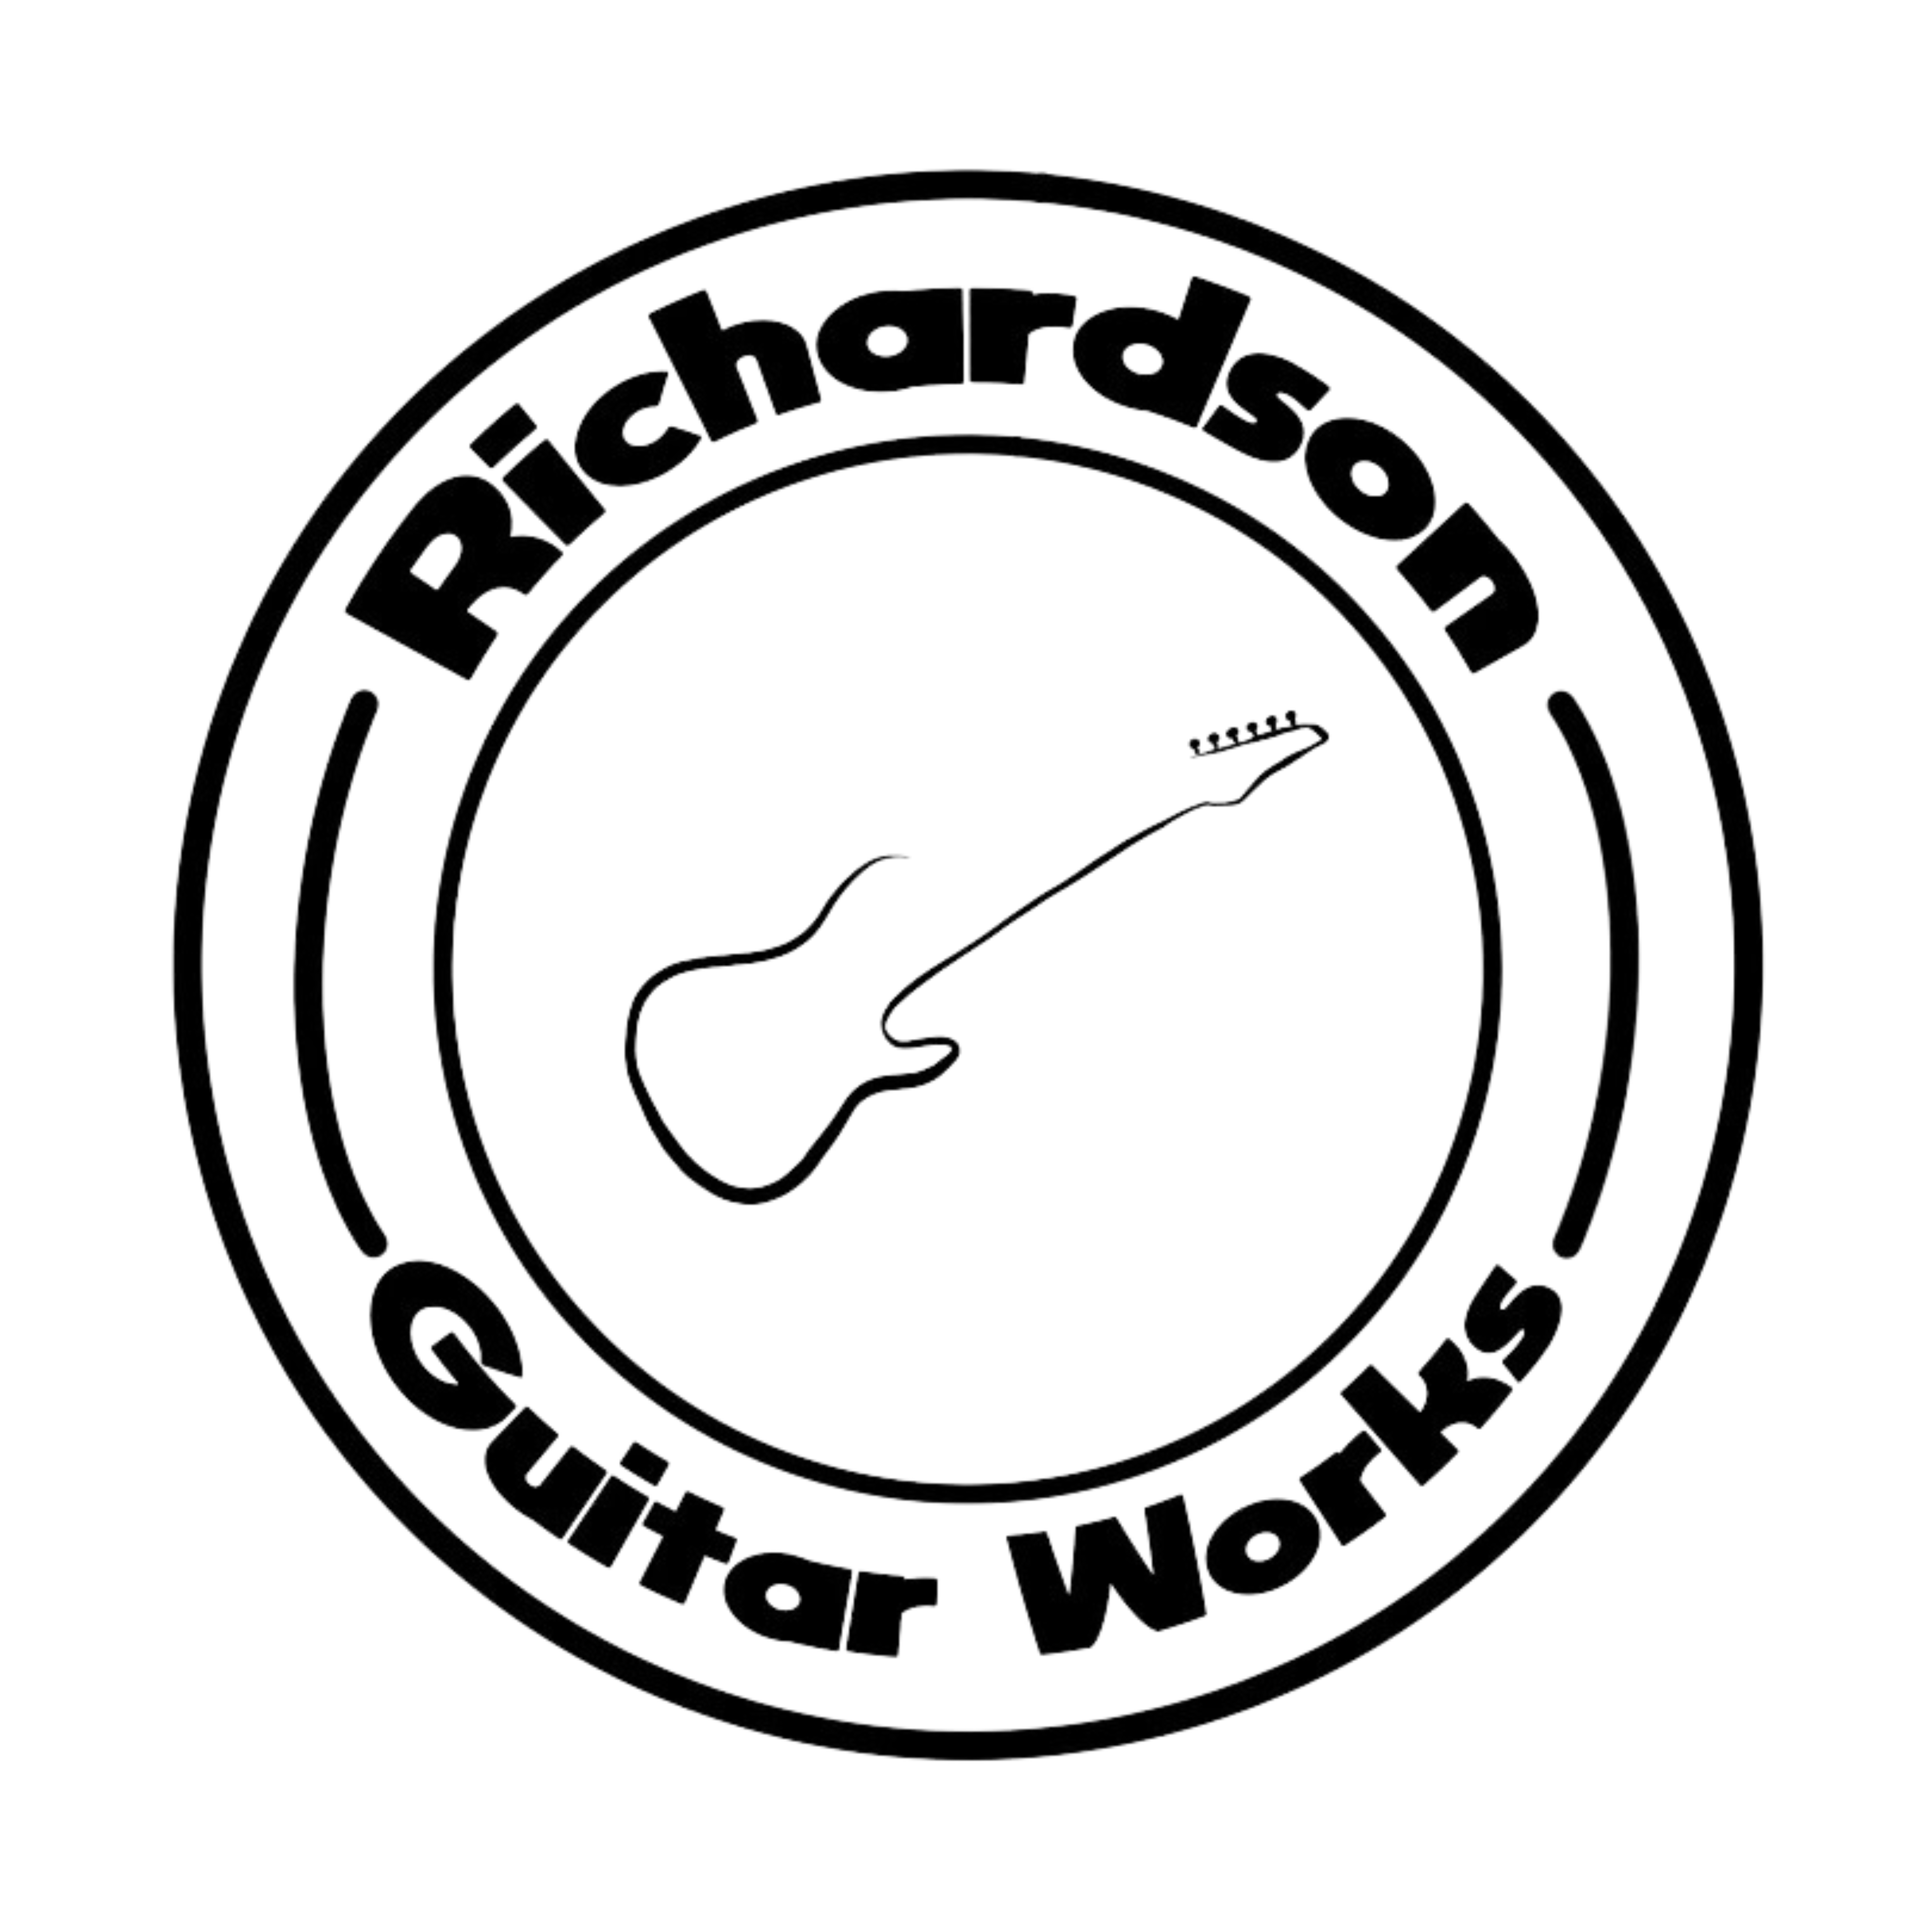 Electric Guitar Vector Hd Images, Electric Guitar Shape Music Decoration  Illustration, Musical Instrument, Soundtrack, Electric Guitar PNG Image For  Free Downlo… | Guitar illustration, Guitar vector, Percussion music